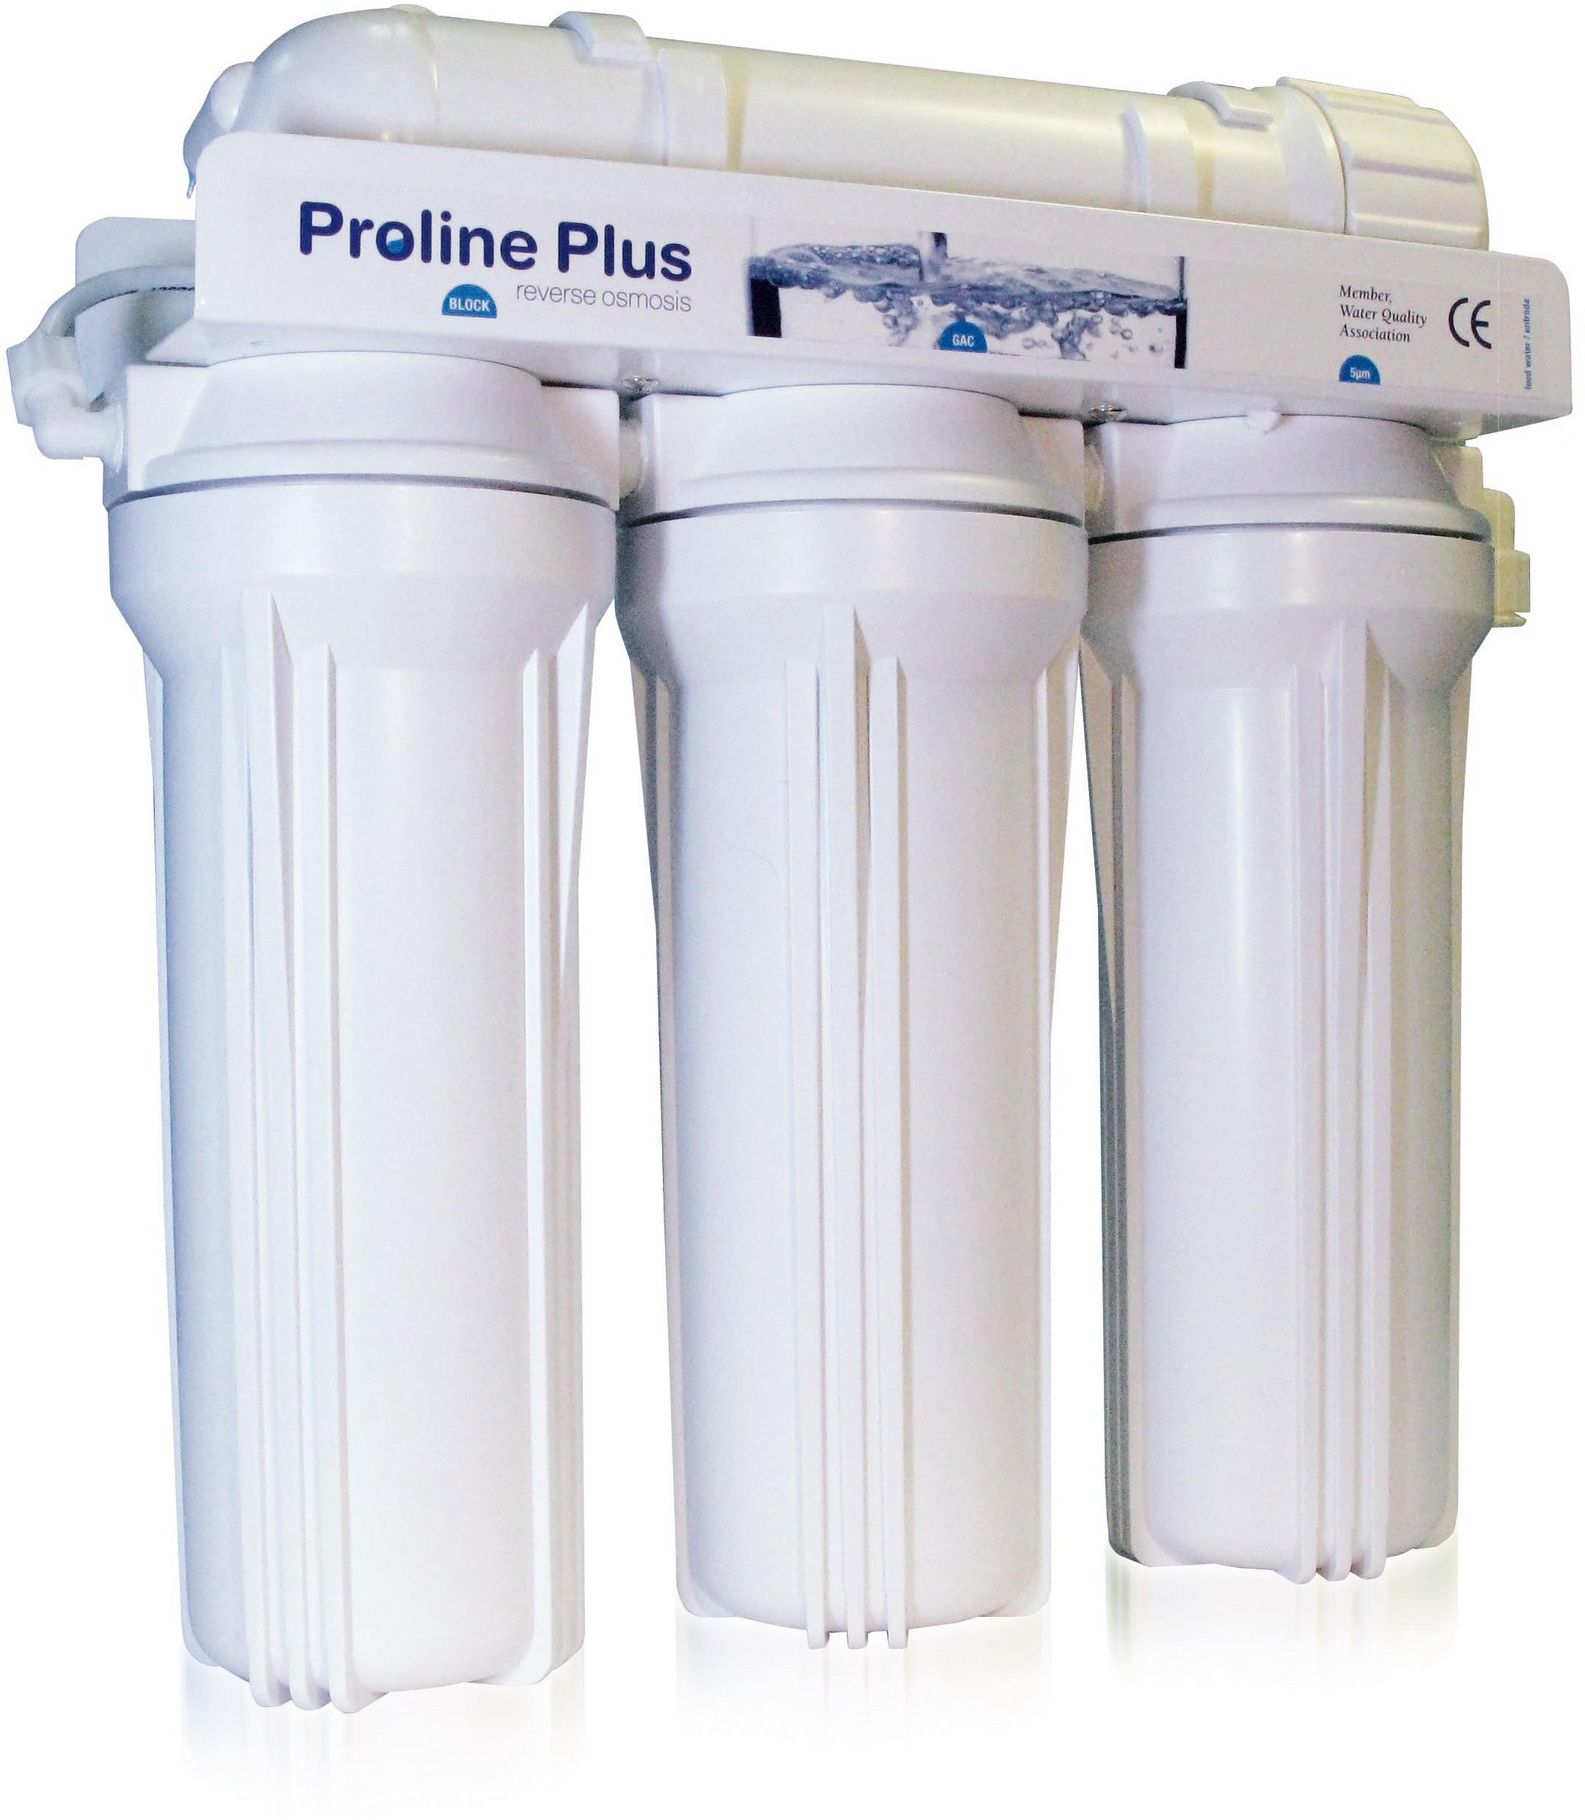 Ranking of the best water softeners in 2020